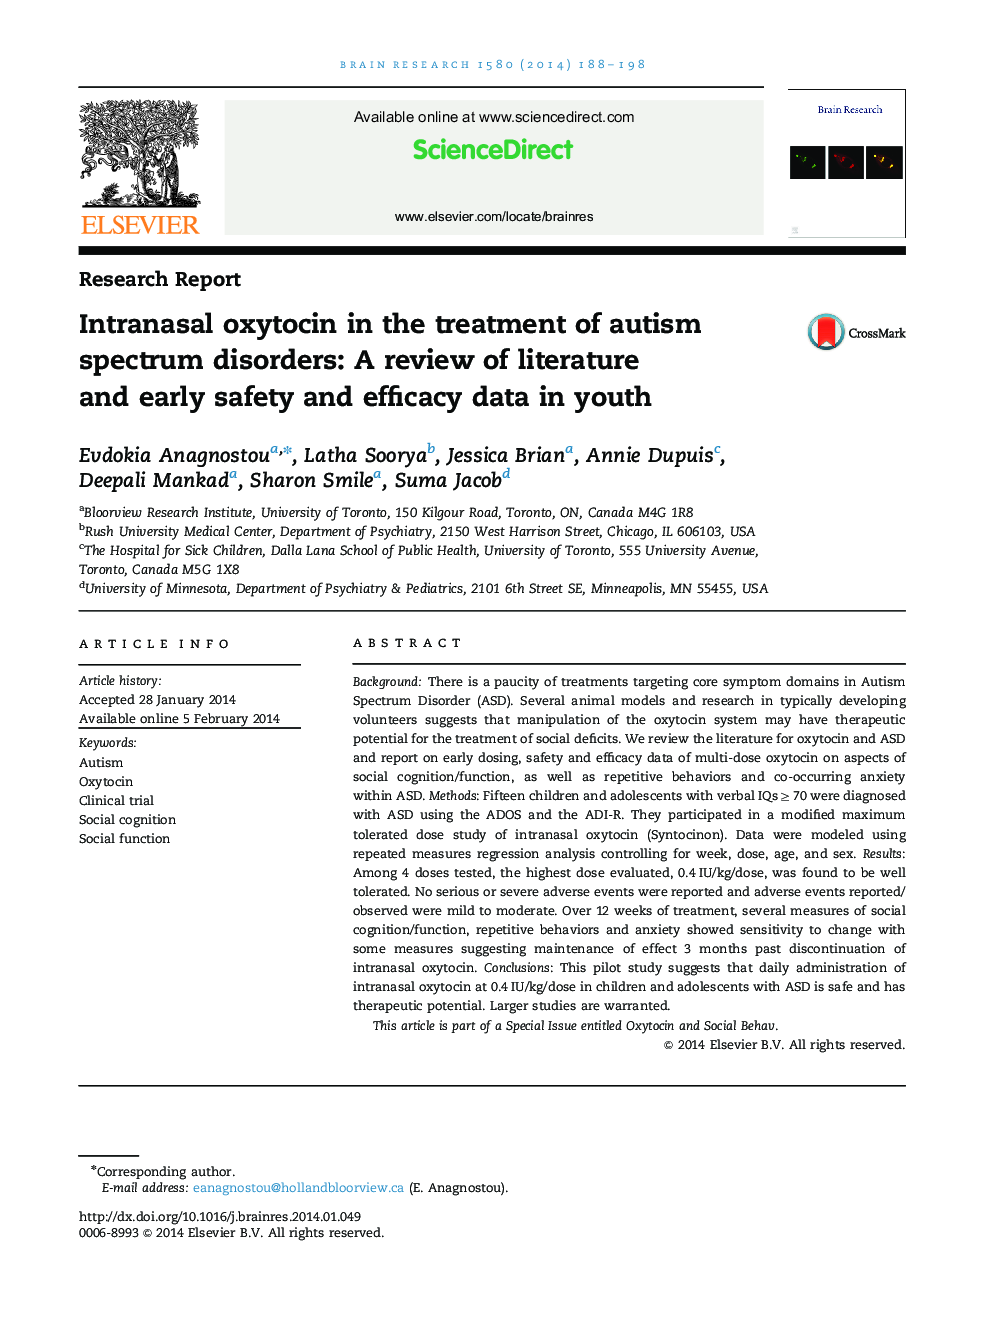 Intranasal oxytocin in the treatment of autism spectrum disorders: A review of literature and early safety and efficacy data in youth